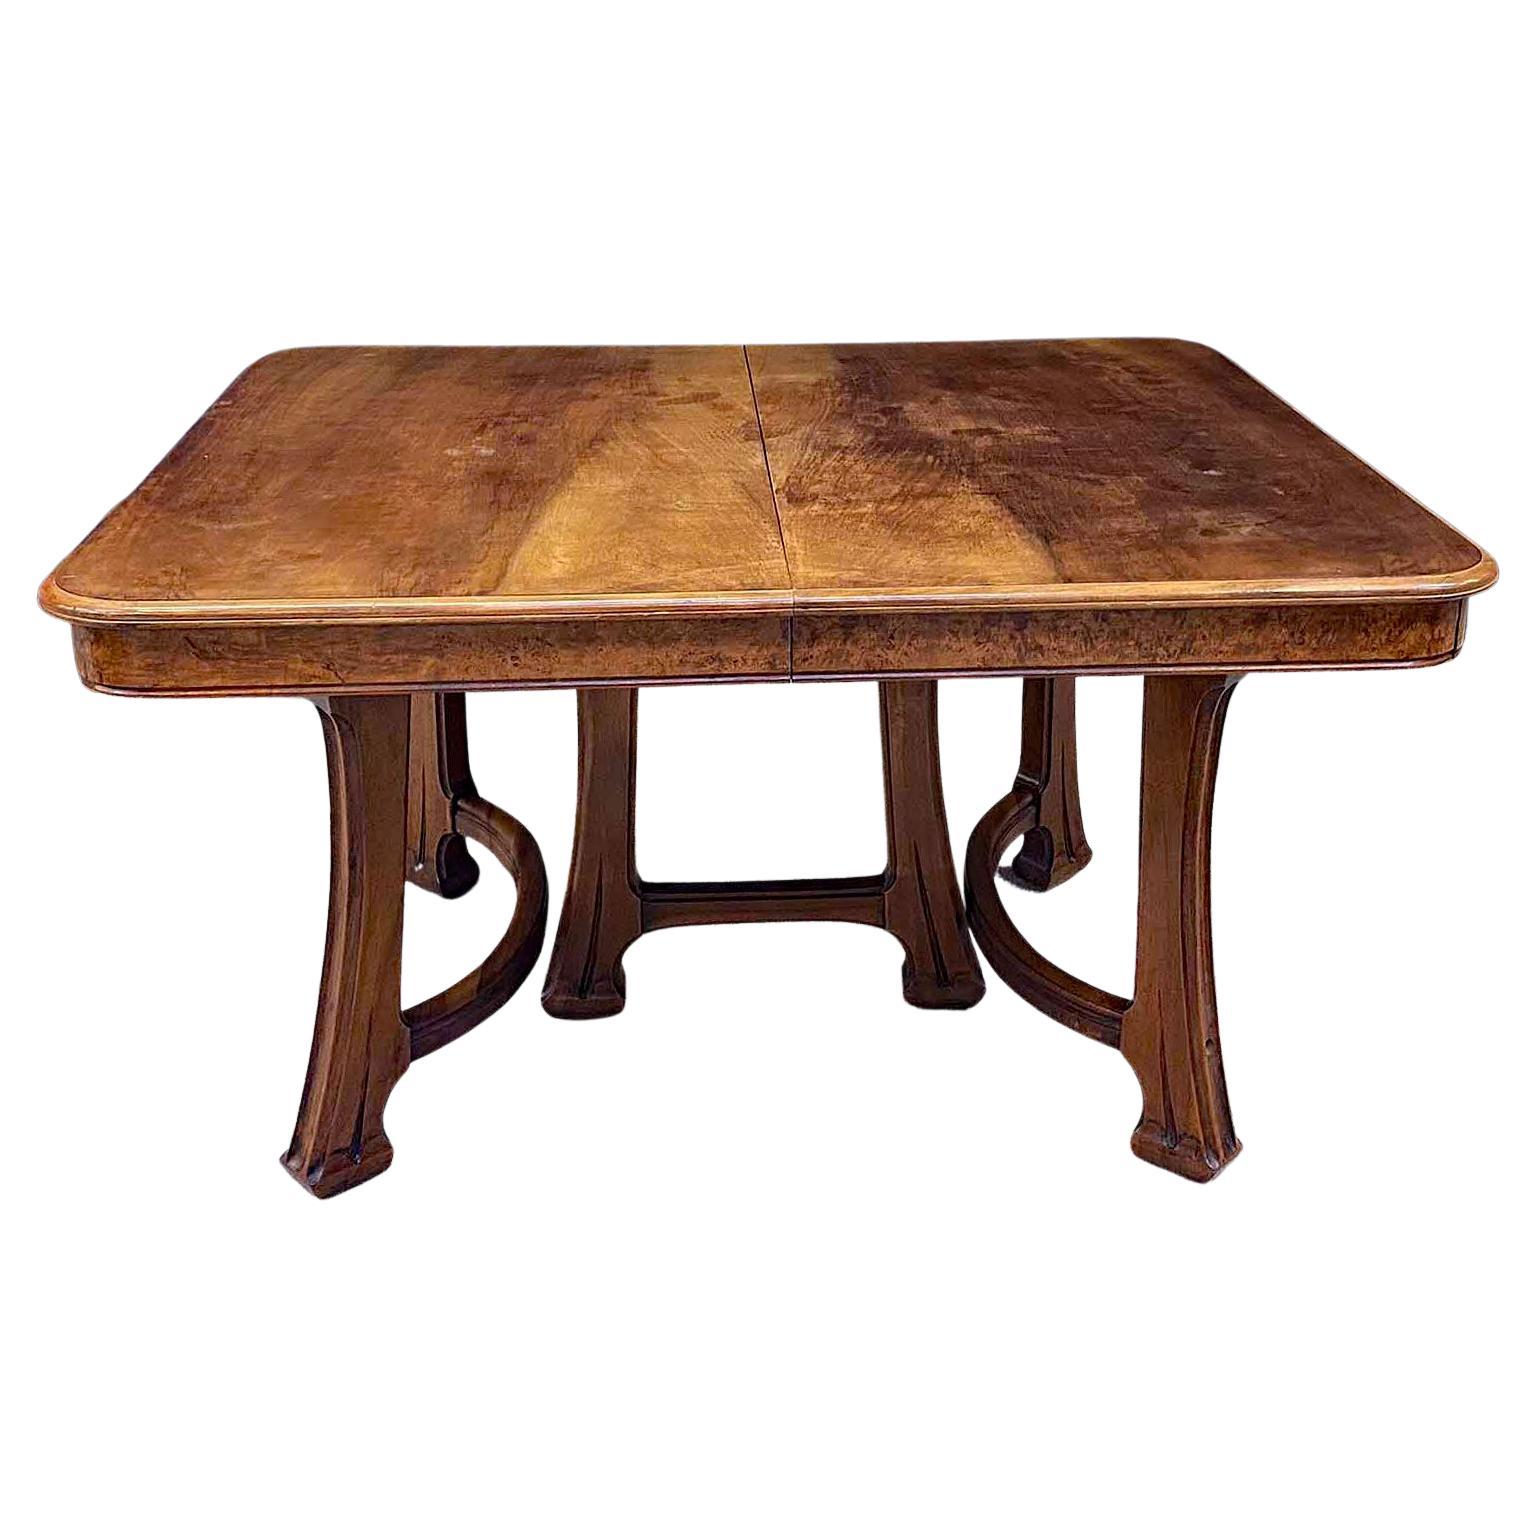 Attributed to Gauthier-Poinsignon & Cie, Art Nouveau Dining Room Table in Walnut For Sale